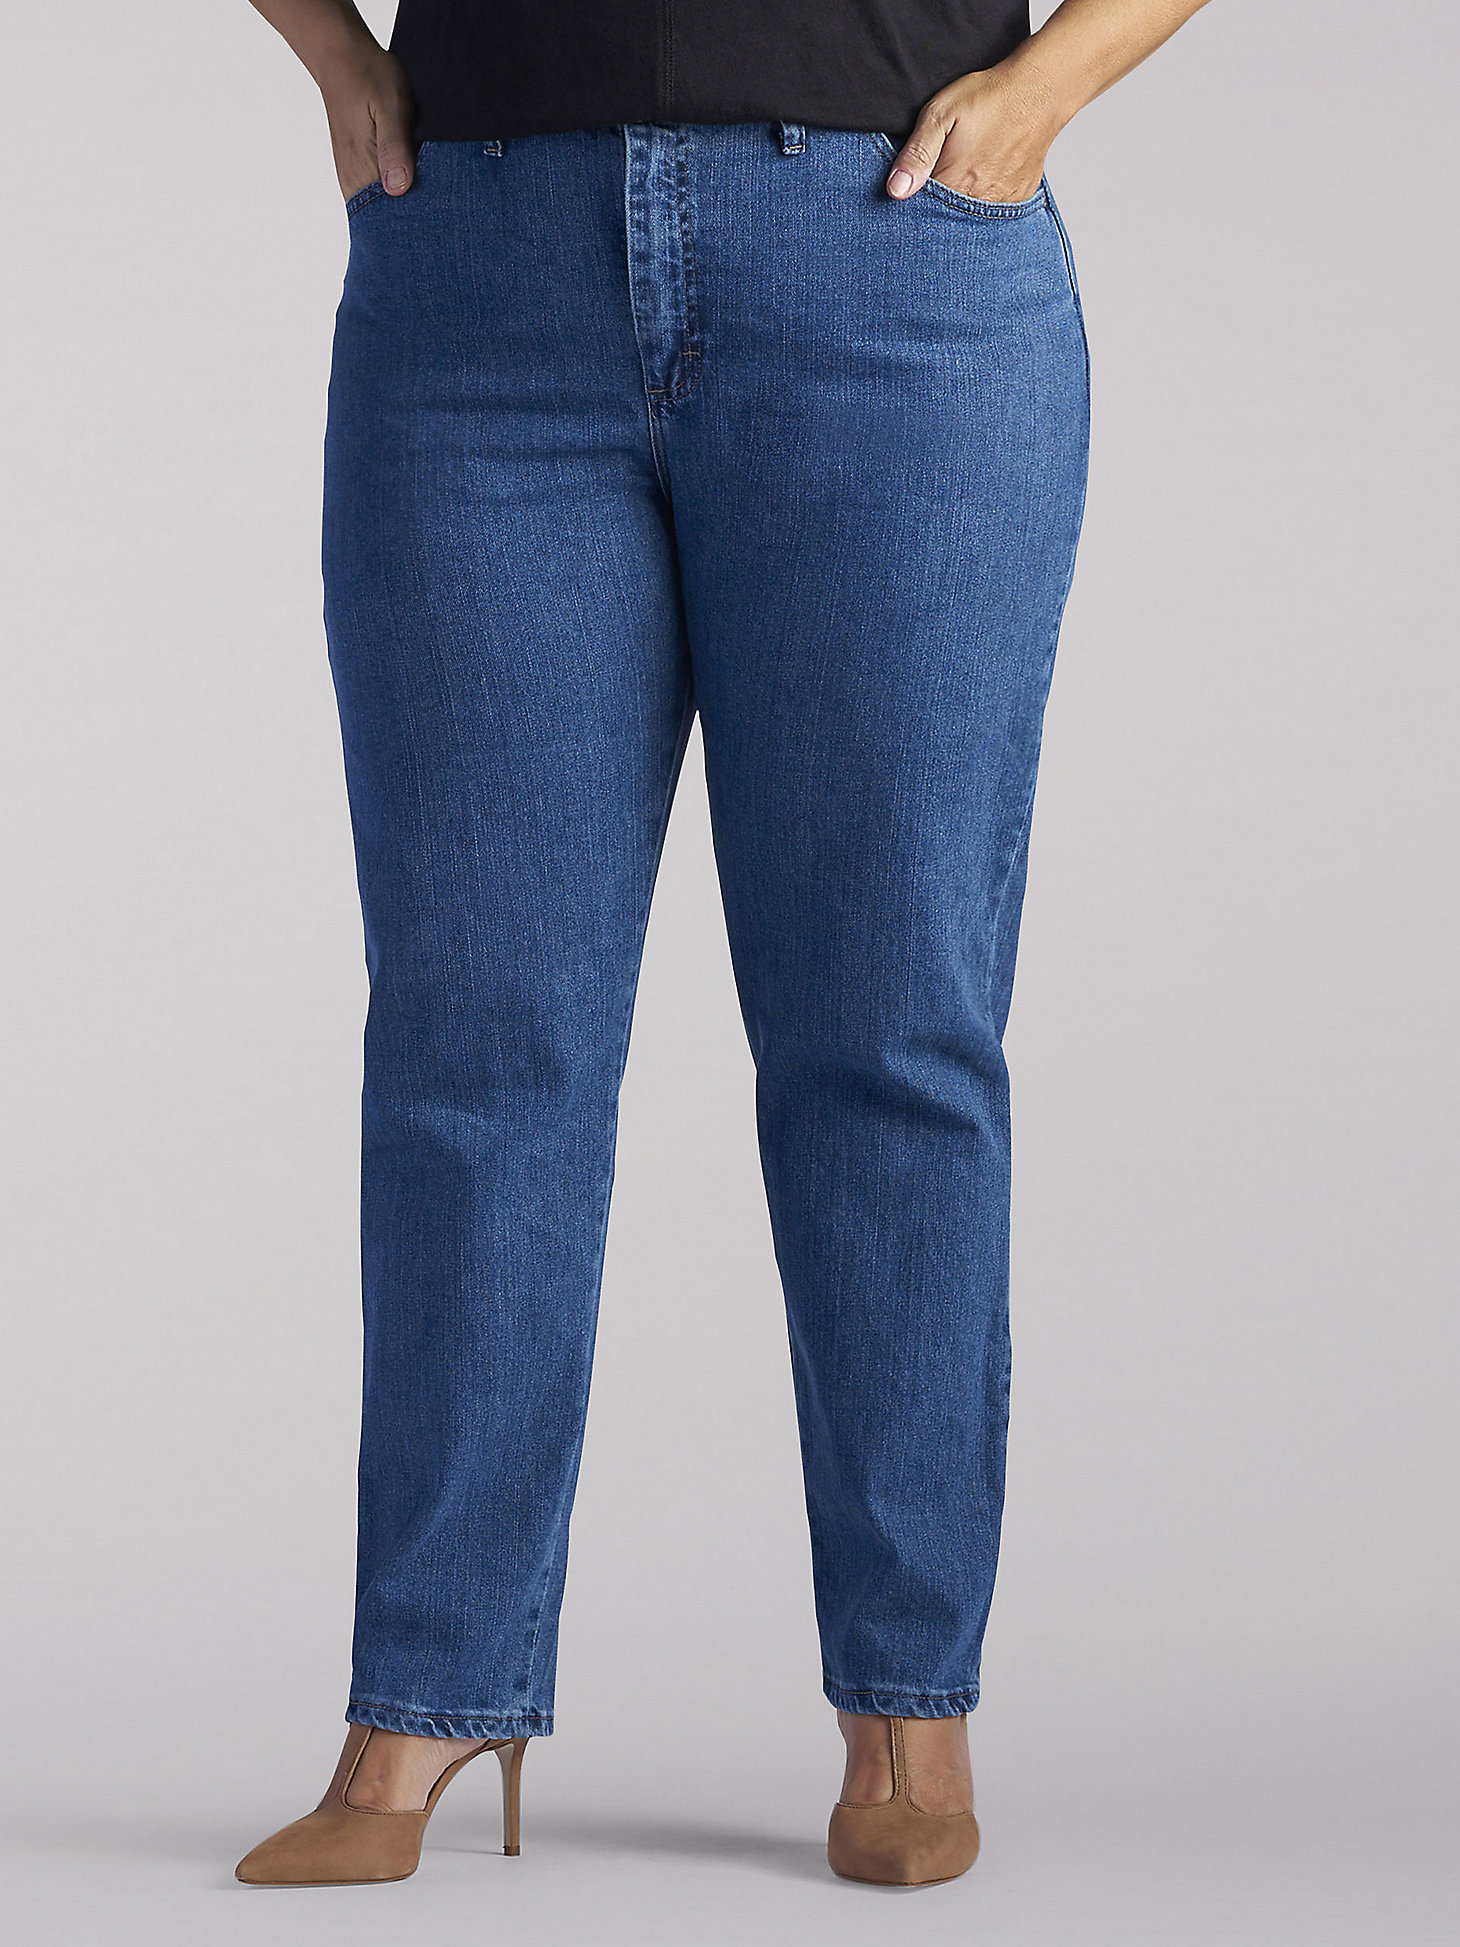 Consume Feudal Separate Women's Relaxed Fit Side Elastic (Plus) Jeans | Lee®